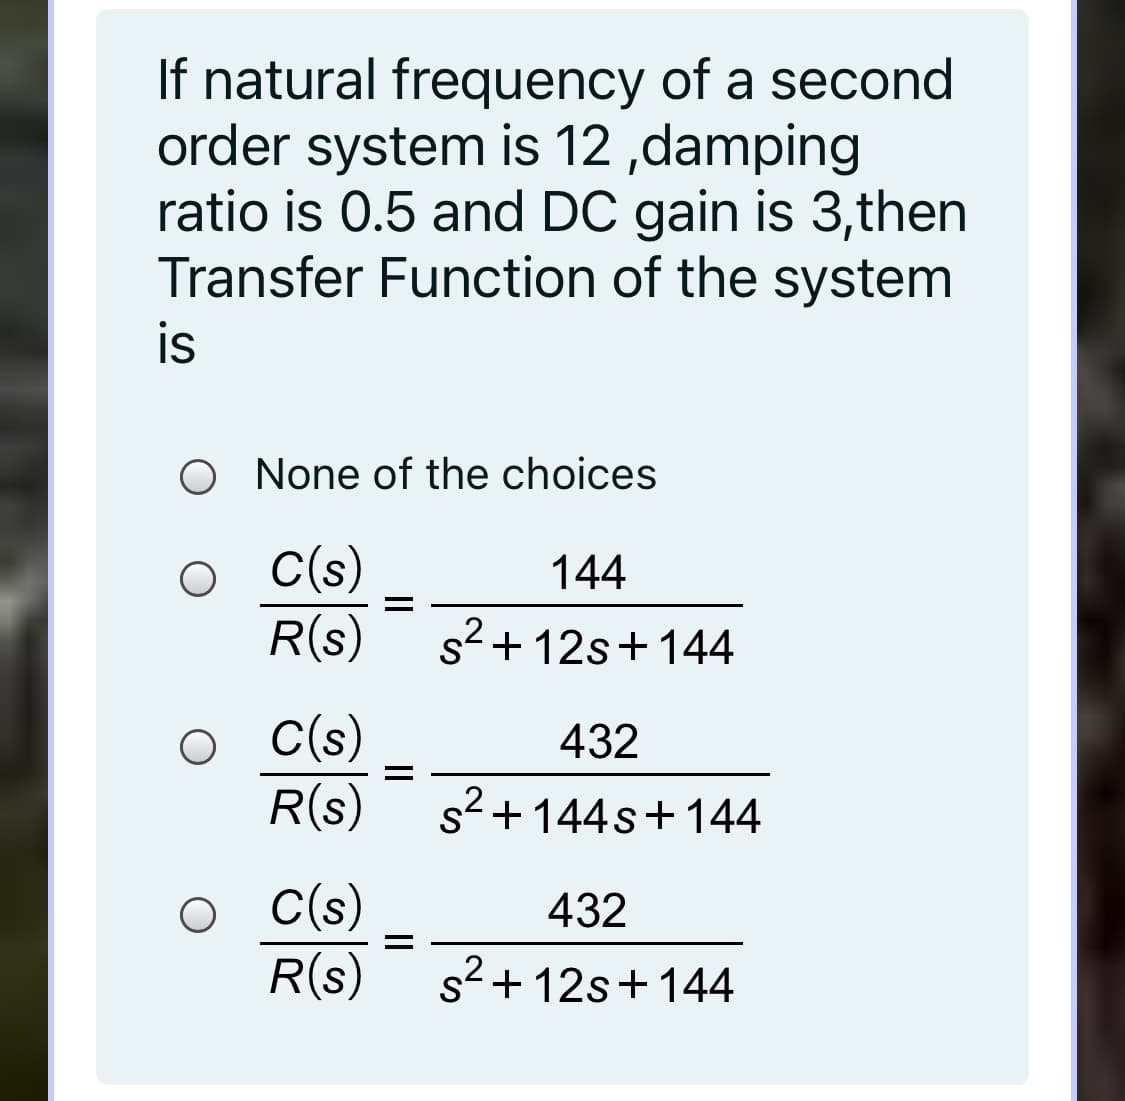 If natural frequency of a second
order system is 12 ,damping
ratio is 0.5 and DC gain is 3,then
Transfer Function of the system
is
O None of the choices
C(s)
R(s)
144
s2 + 12s+144
C(s)
R(s)
432
s+144s+144
C(s)
R(s)
432
s2 + 12s+144
